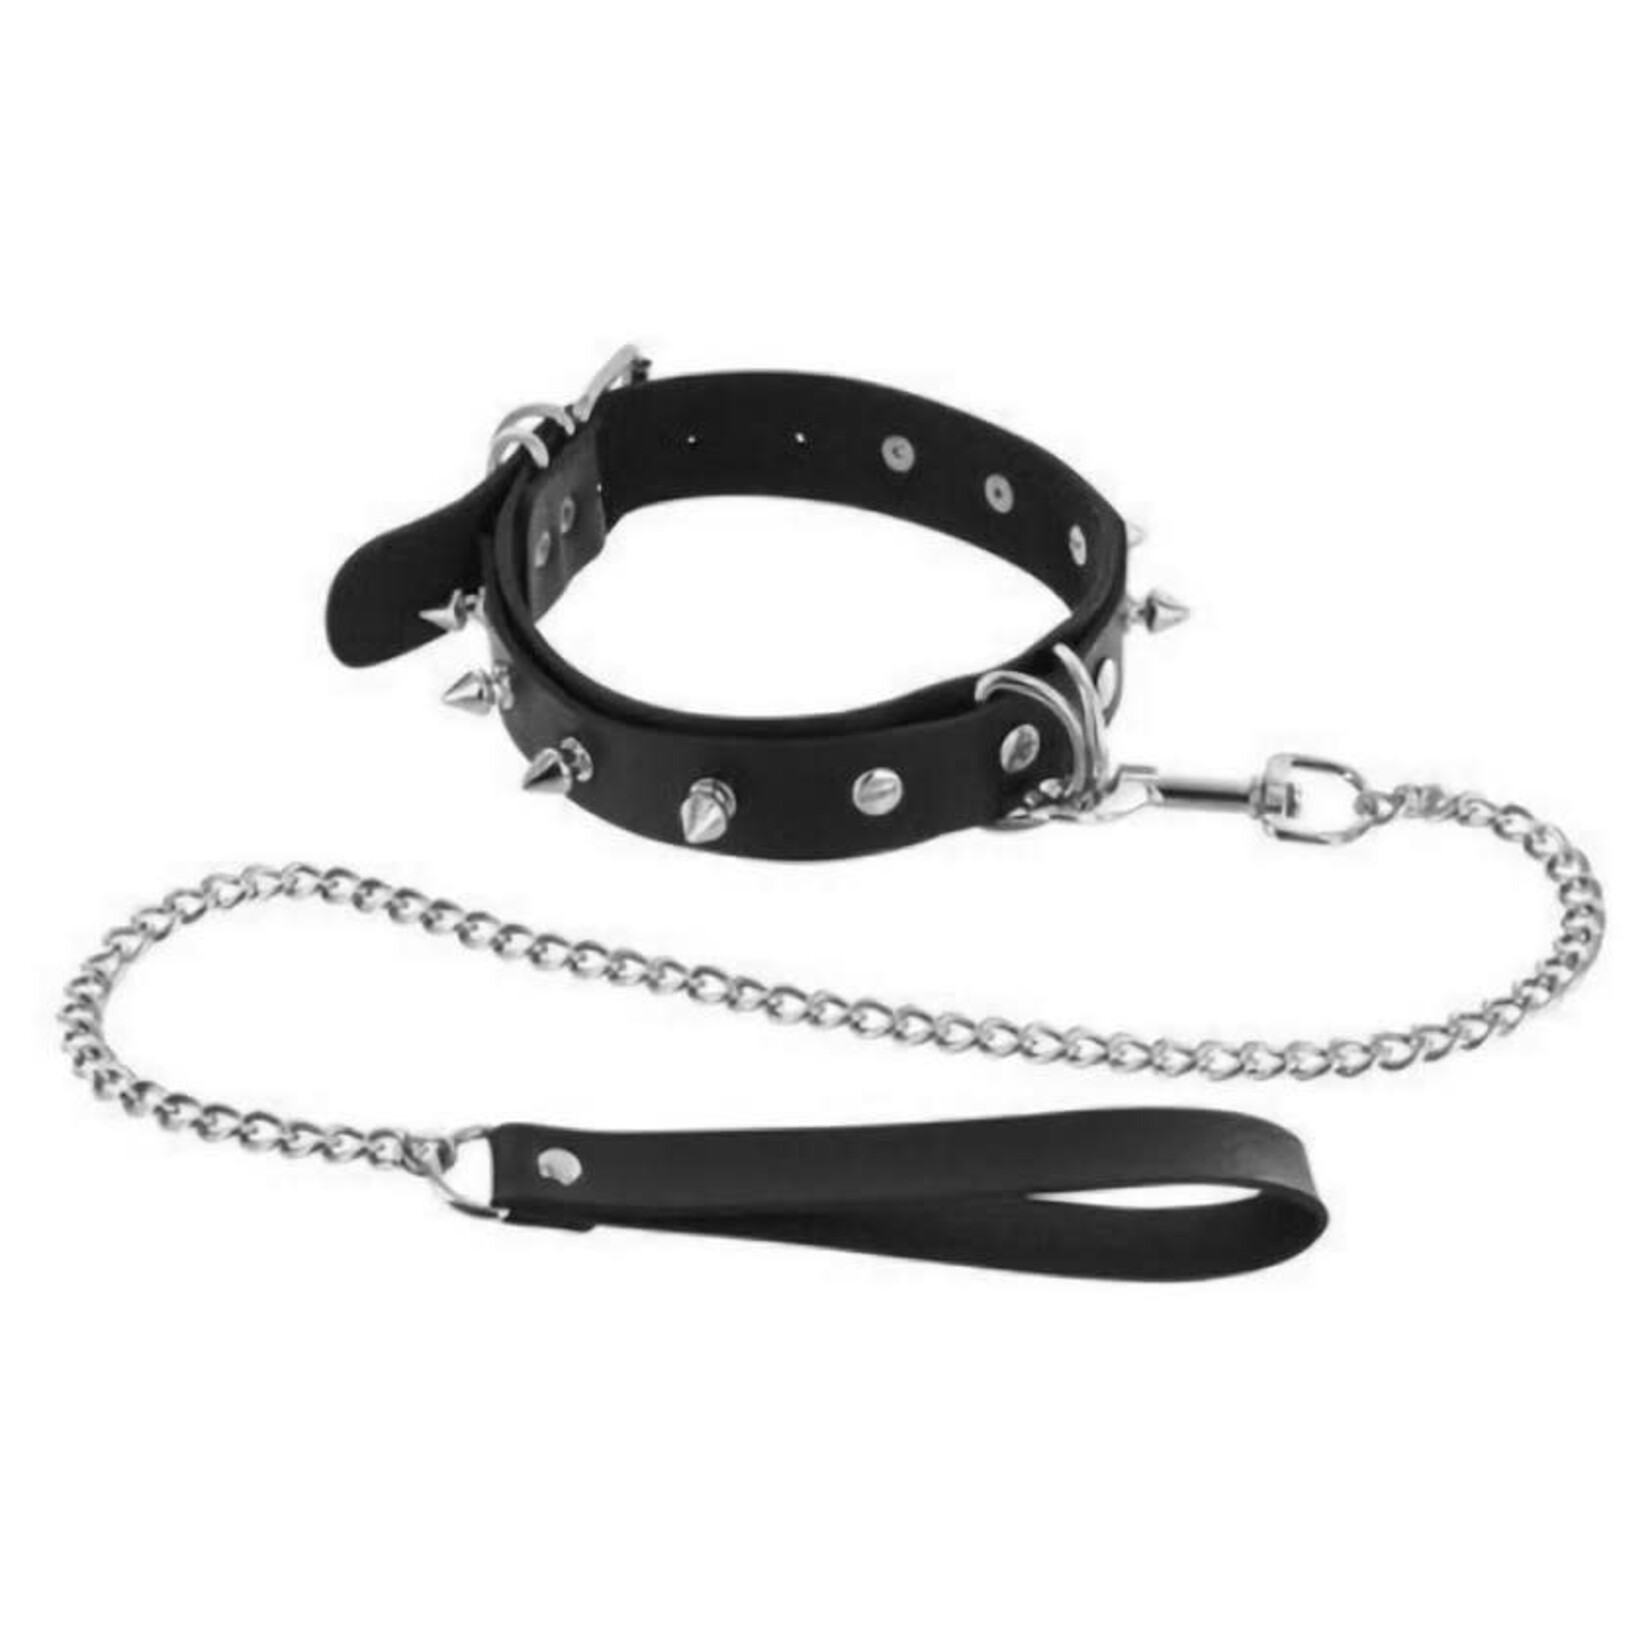 FETISHTENTATION FETISH TENTATION - CHOKER WITH METAL SPIKES AND RINGS